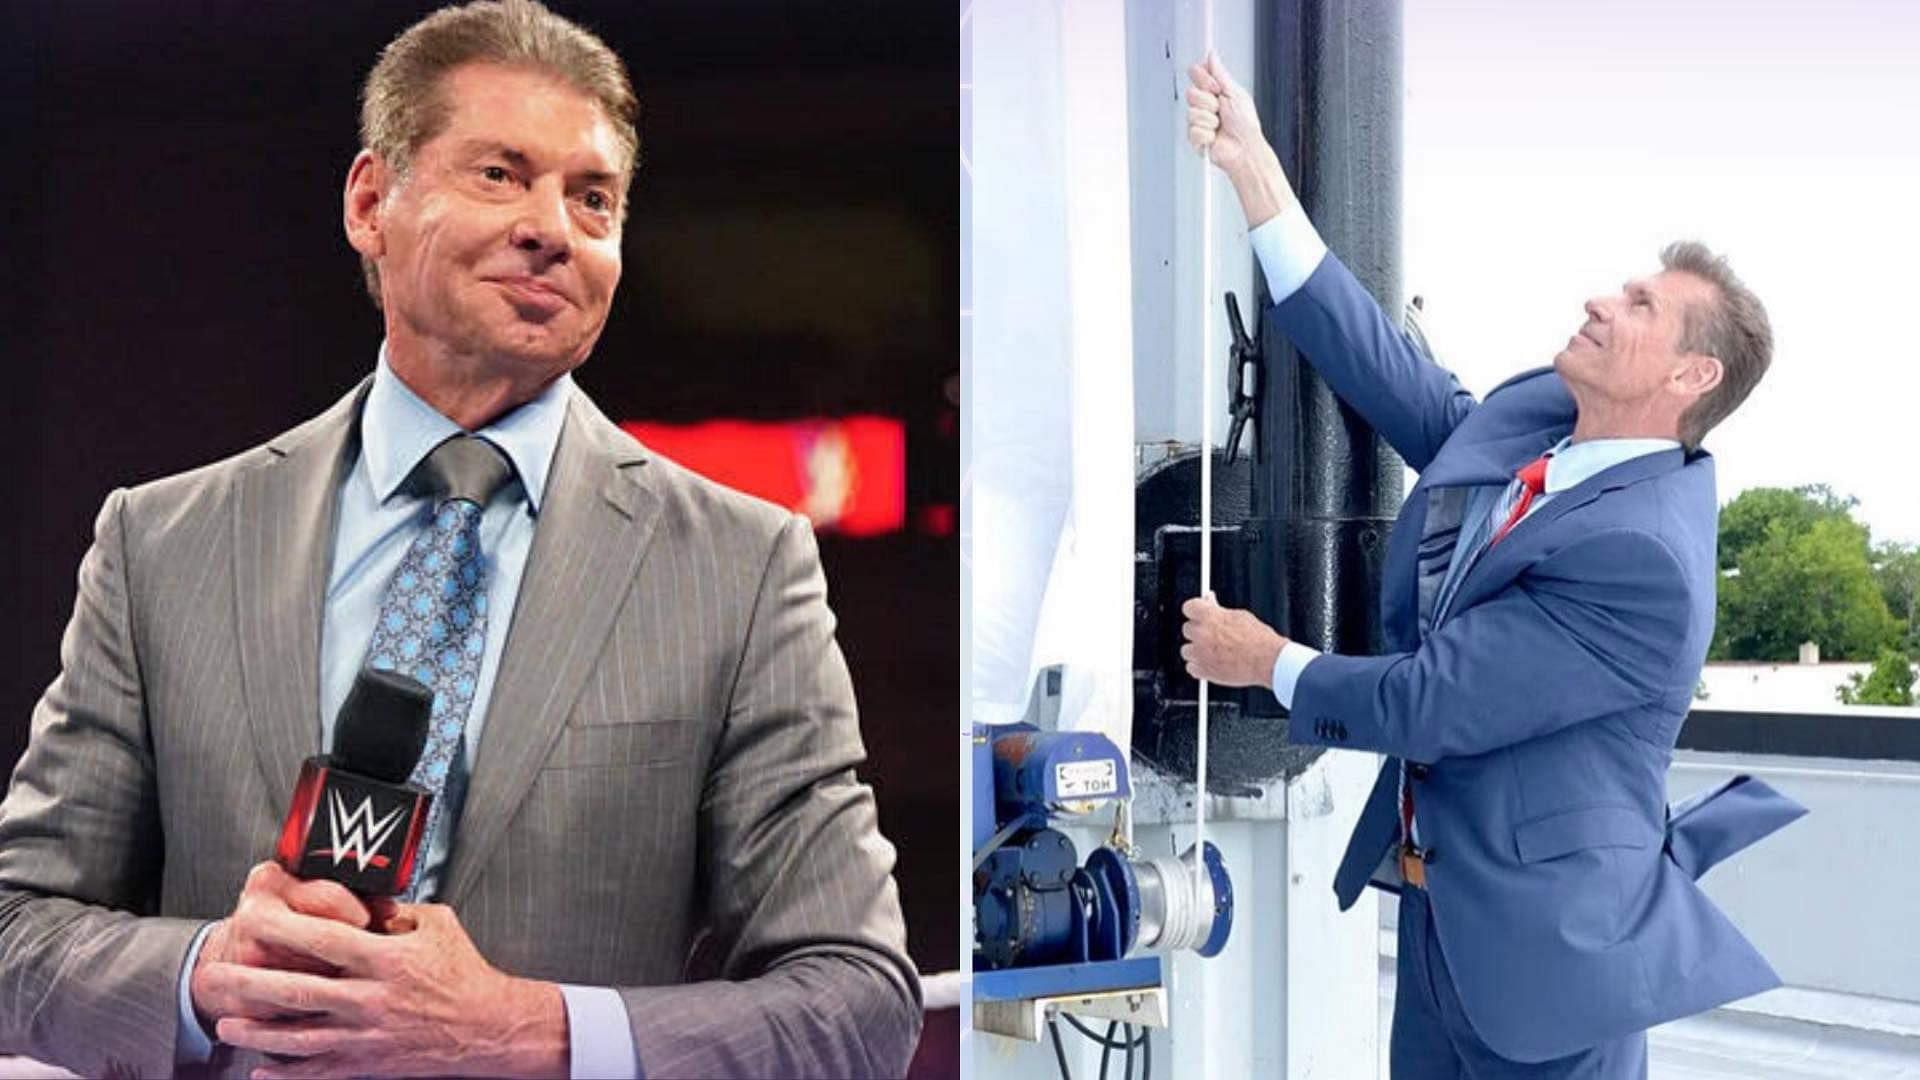 Vince McMahon had revolutionized the pro-wrestling business during his WWE tenure